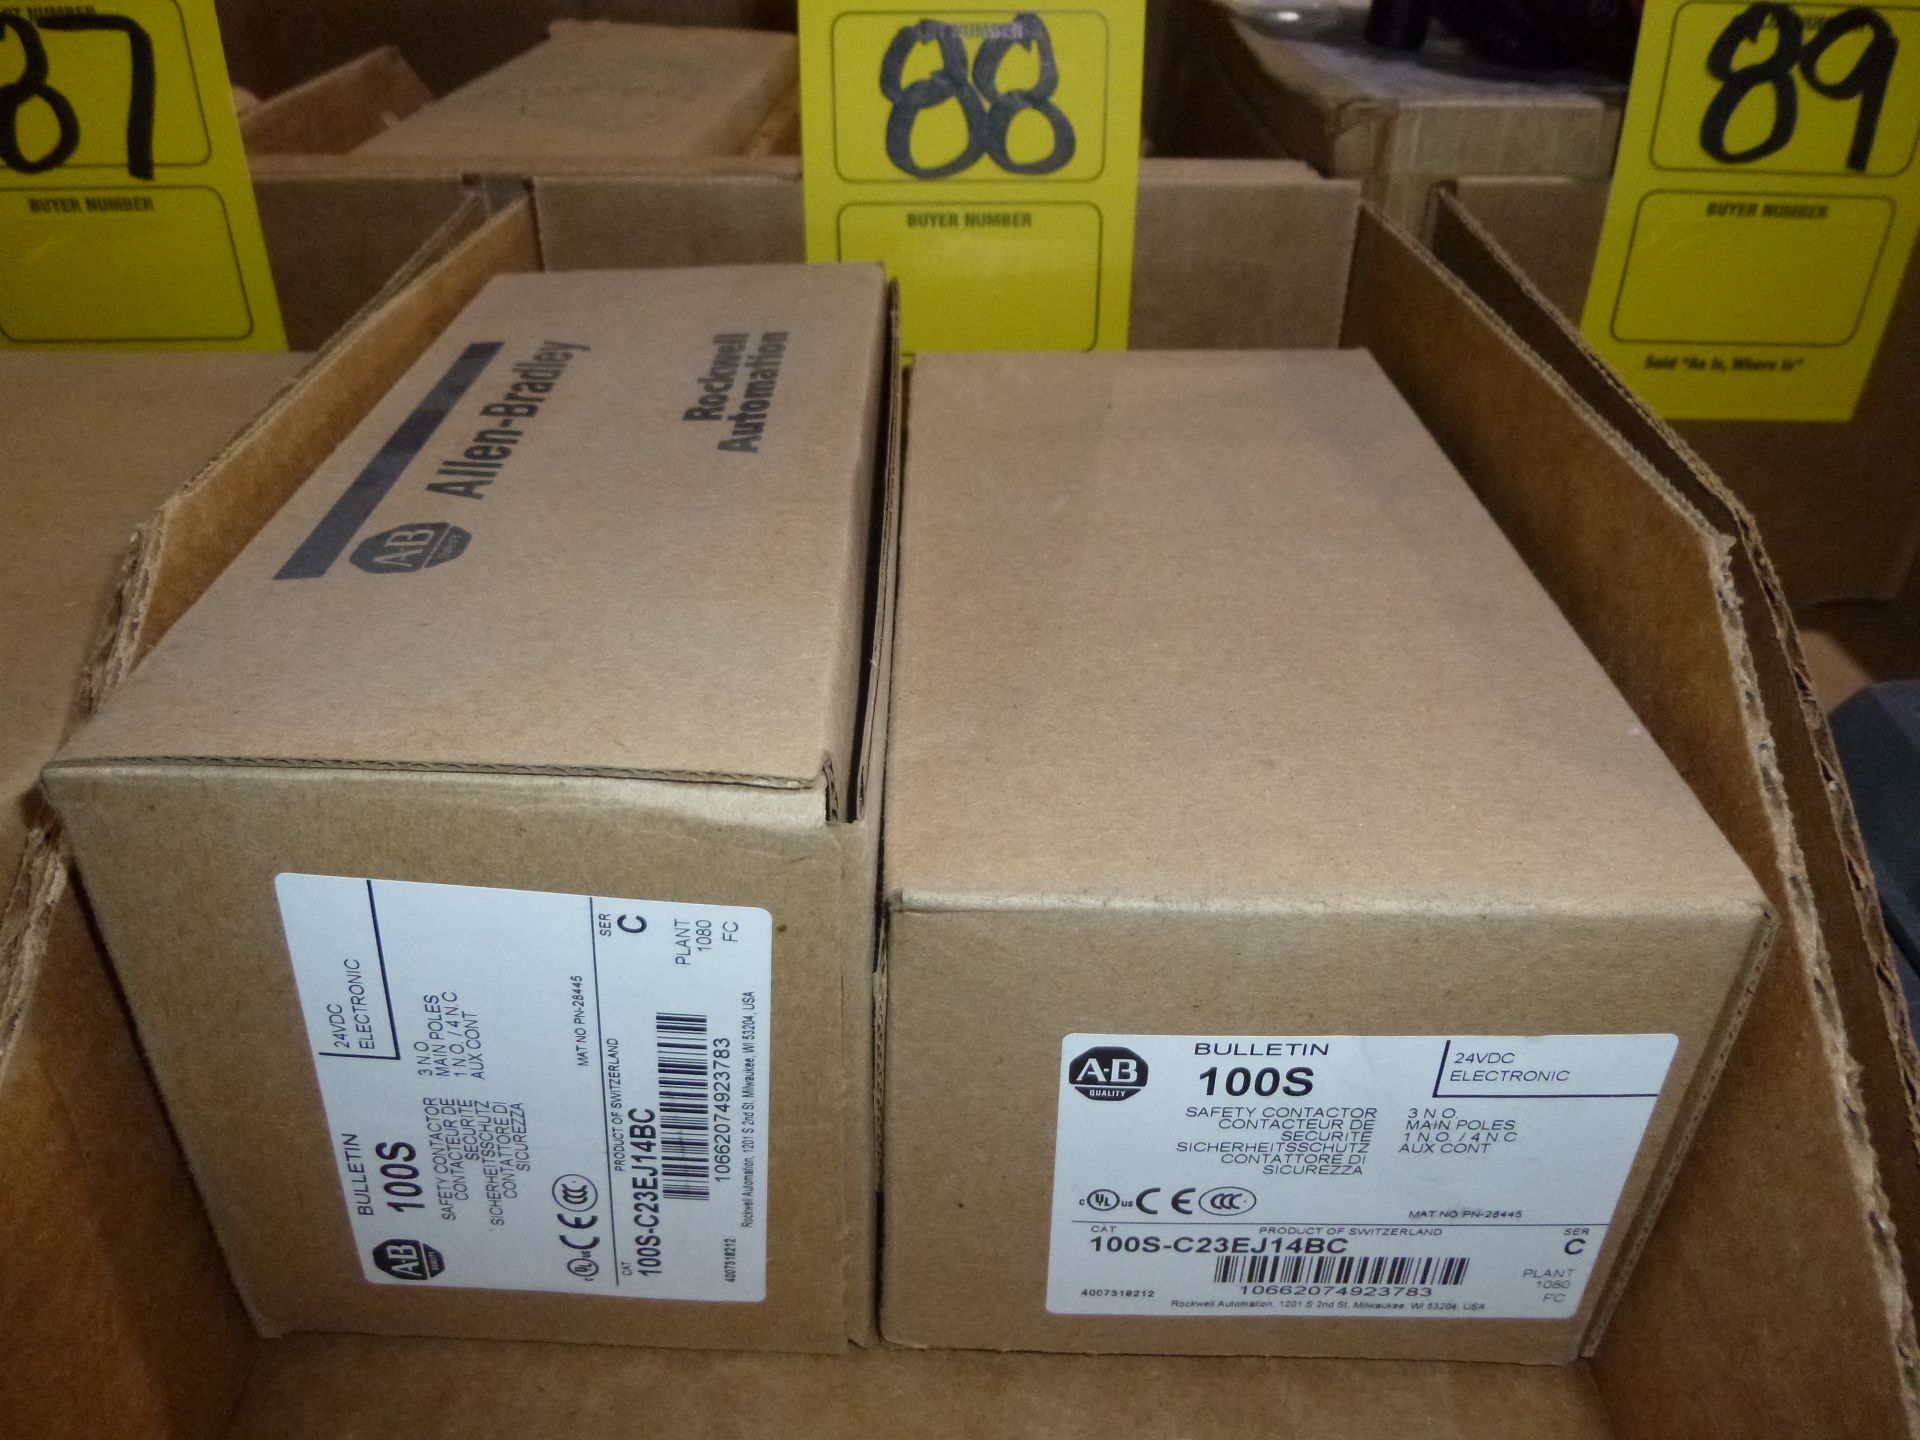 Qty 2 Allen Bradley Safety Contactor Model number 100S-C23EJ14BC, new in boxes, as always with